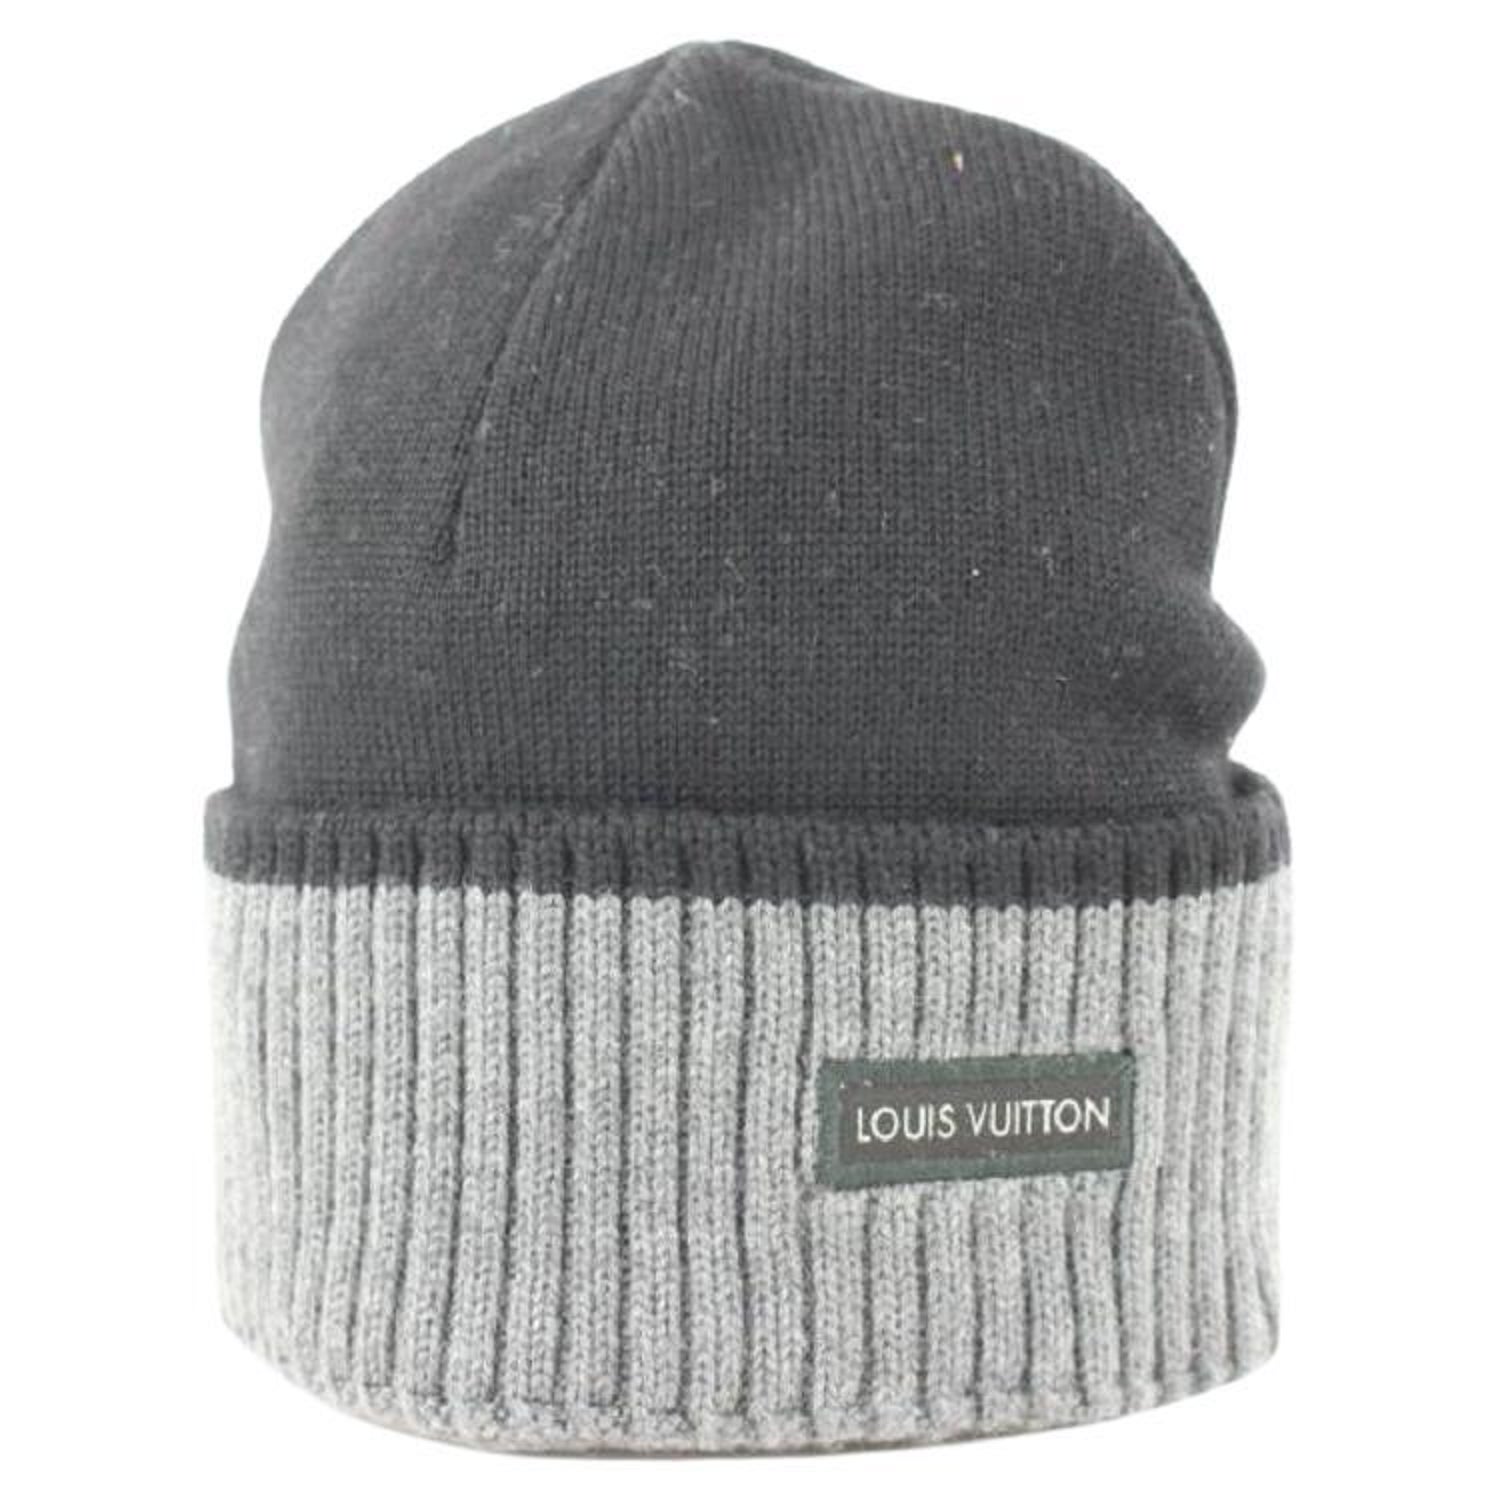 Louis Vuitton Hat Beanie - For Sale on 1stDibs